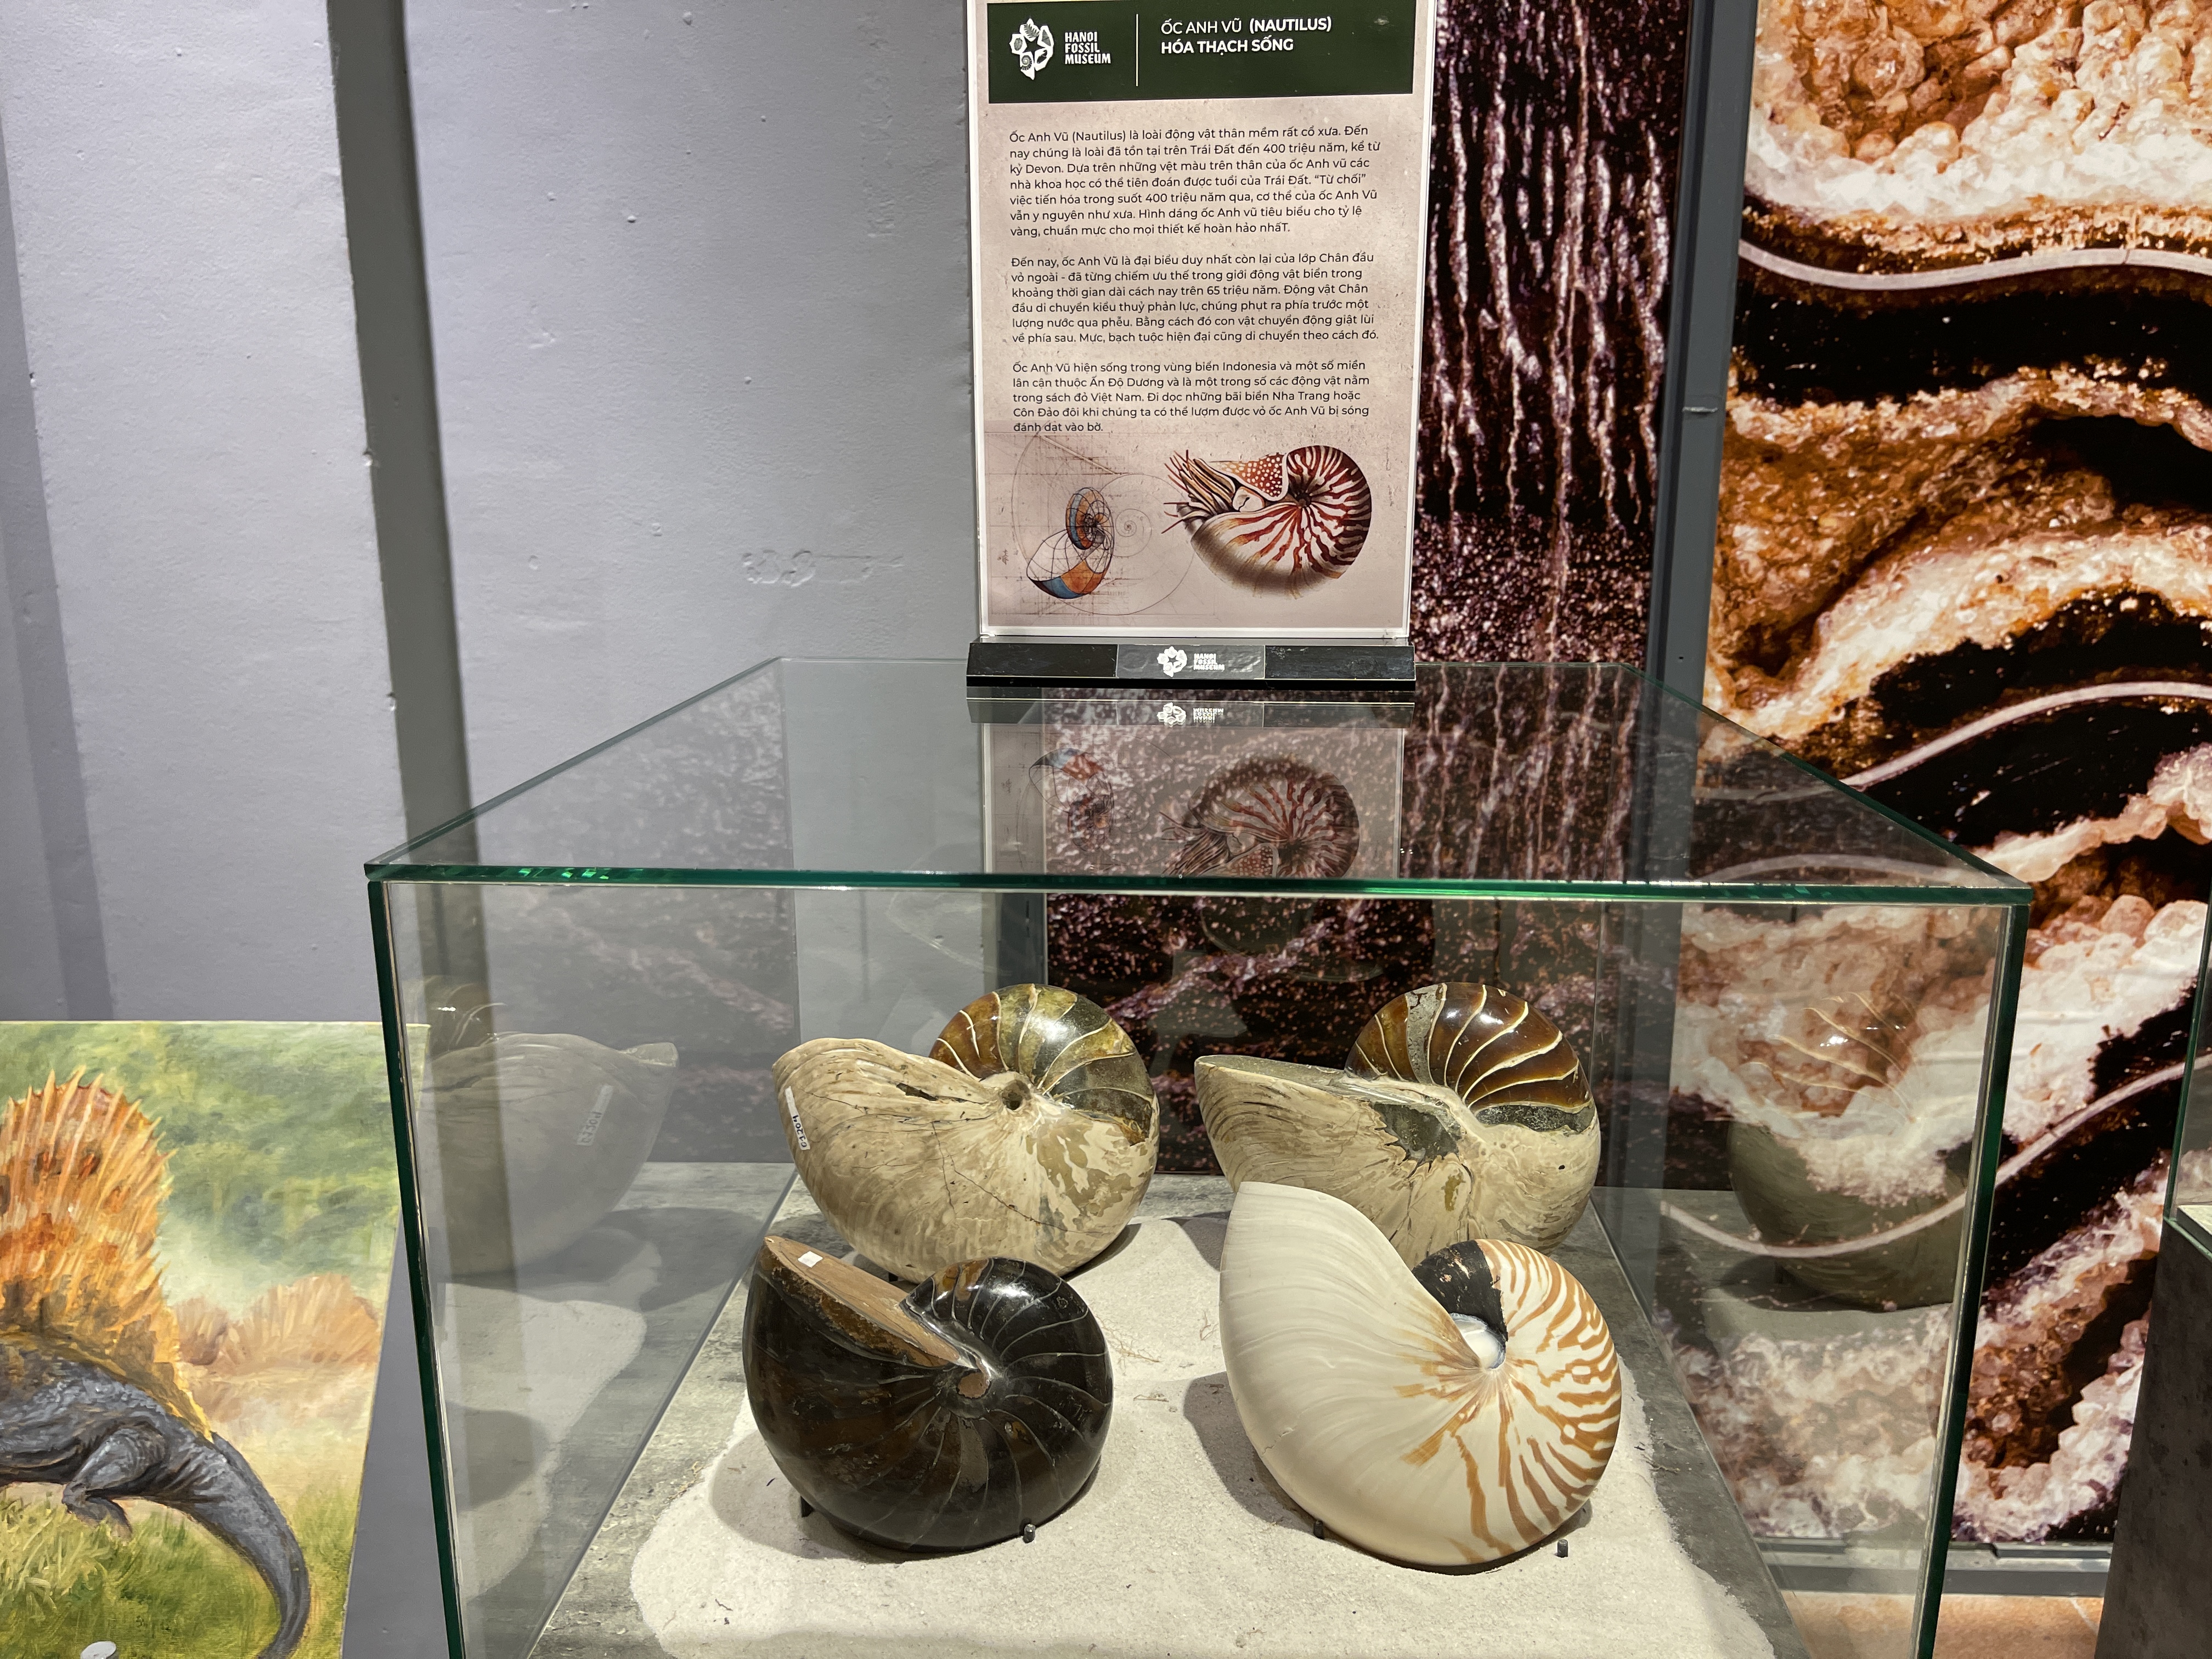 Nautilus fossils on display at the exhibition. Photo: Dong Nguyen / Tuoi Tre News